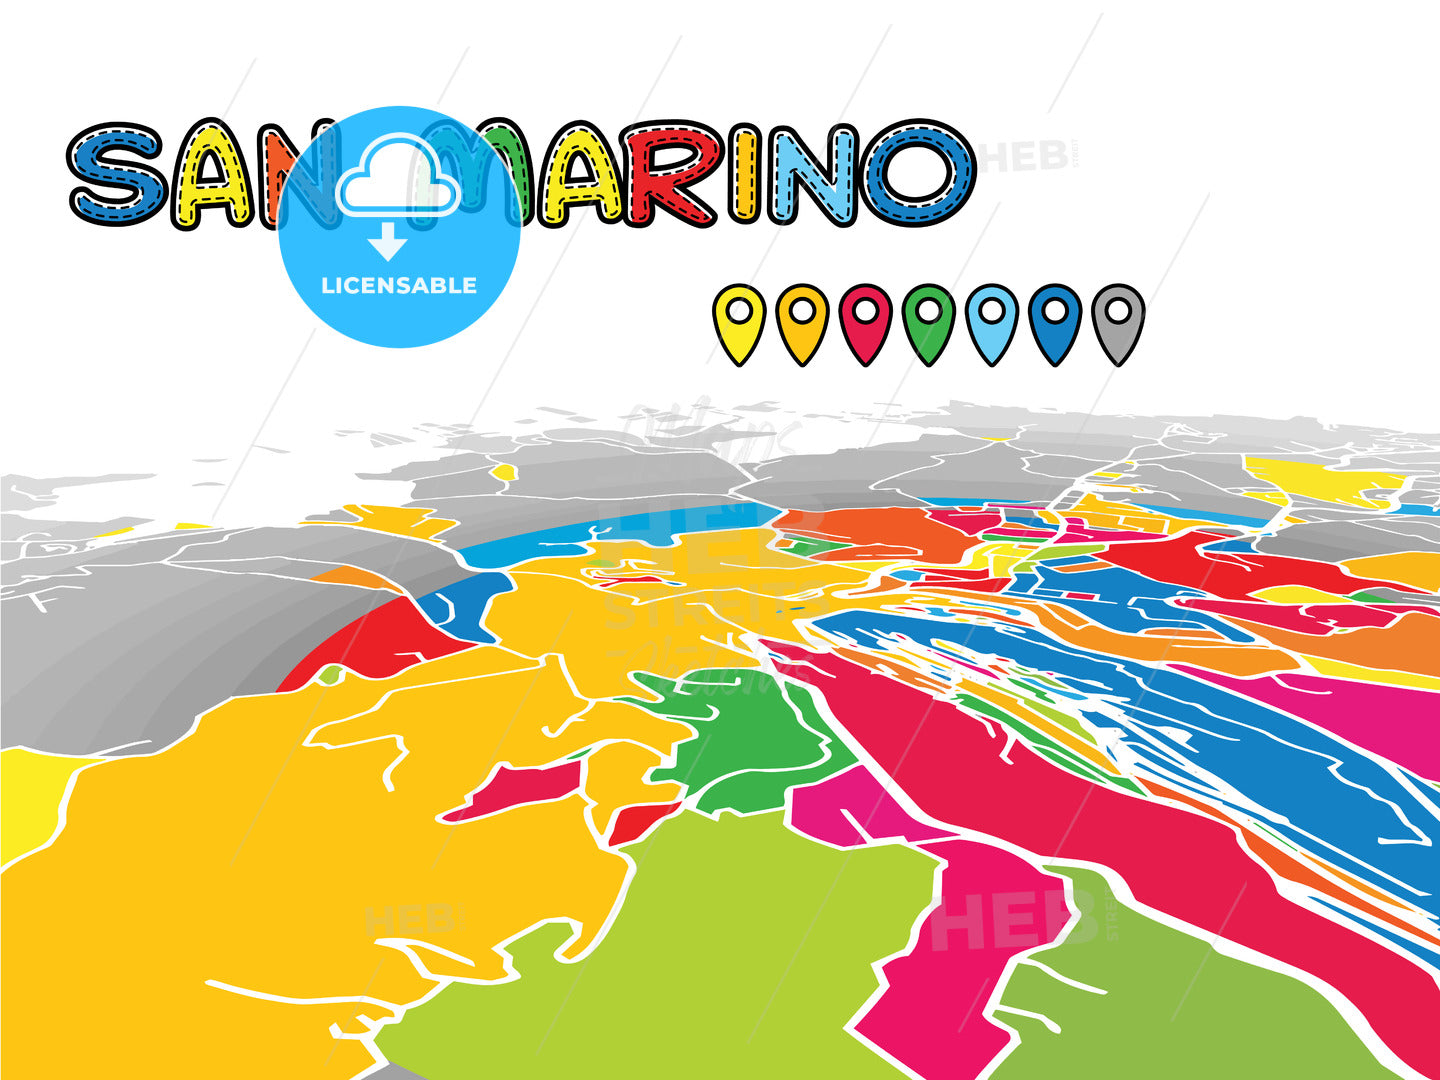 San Marino downtown map in perspective